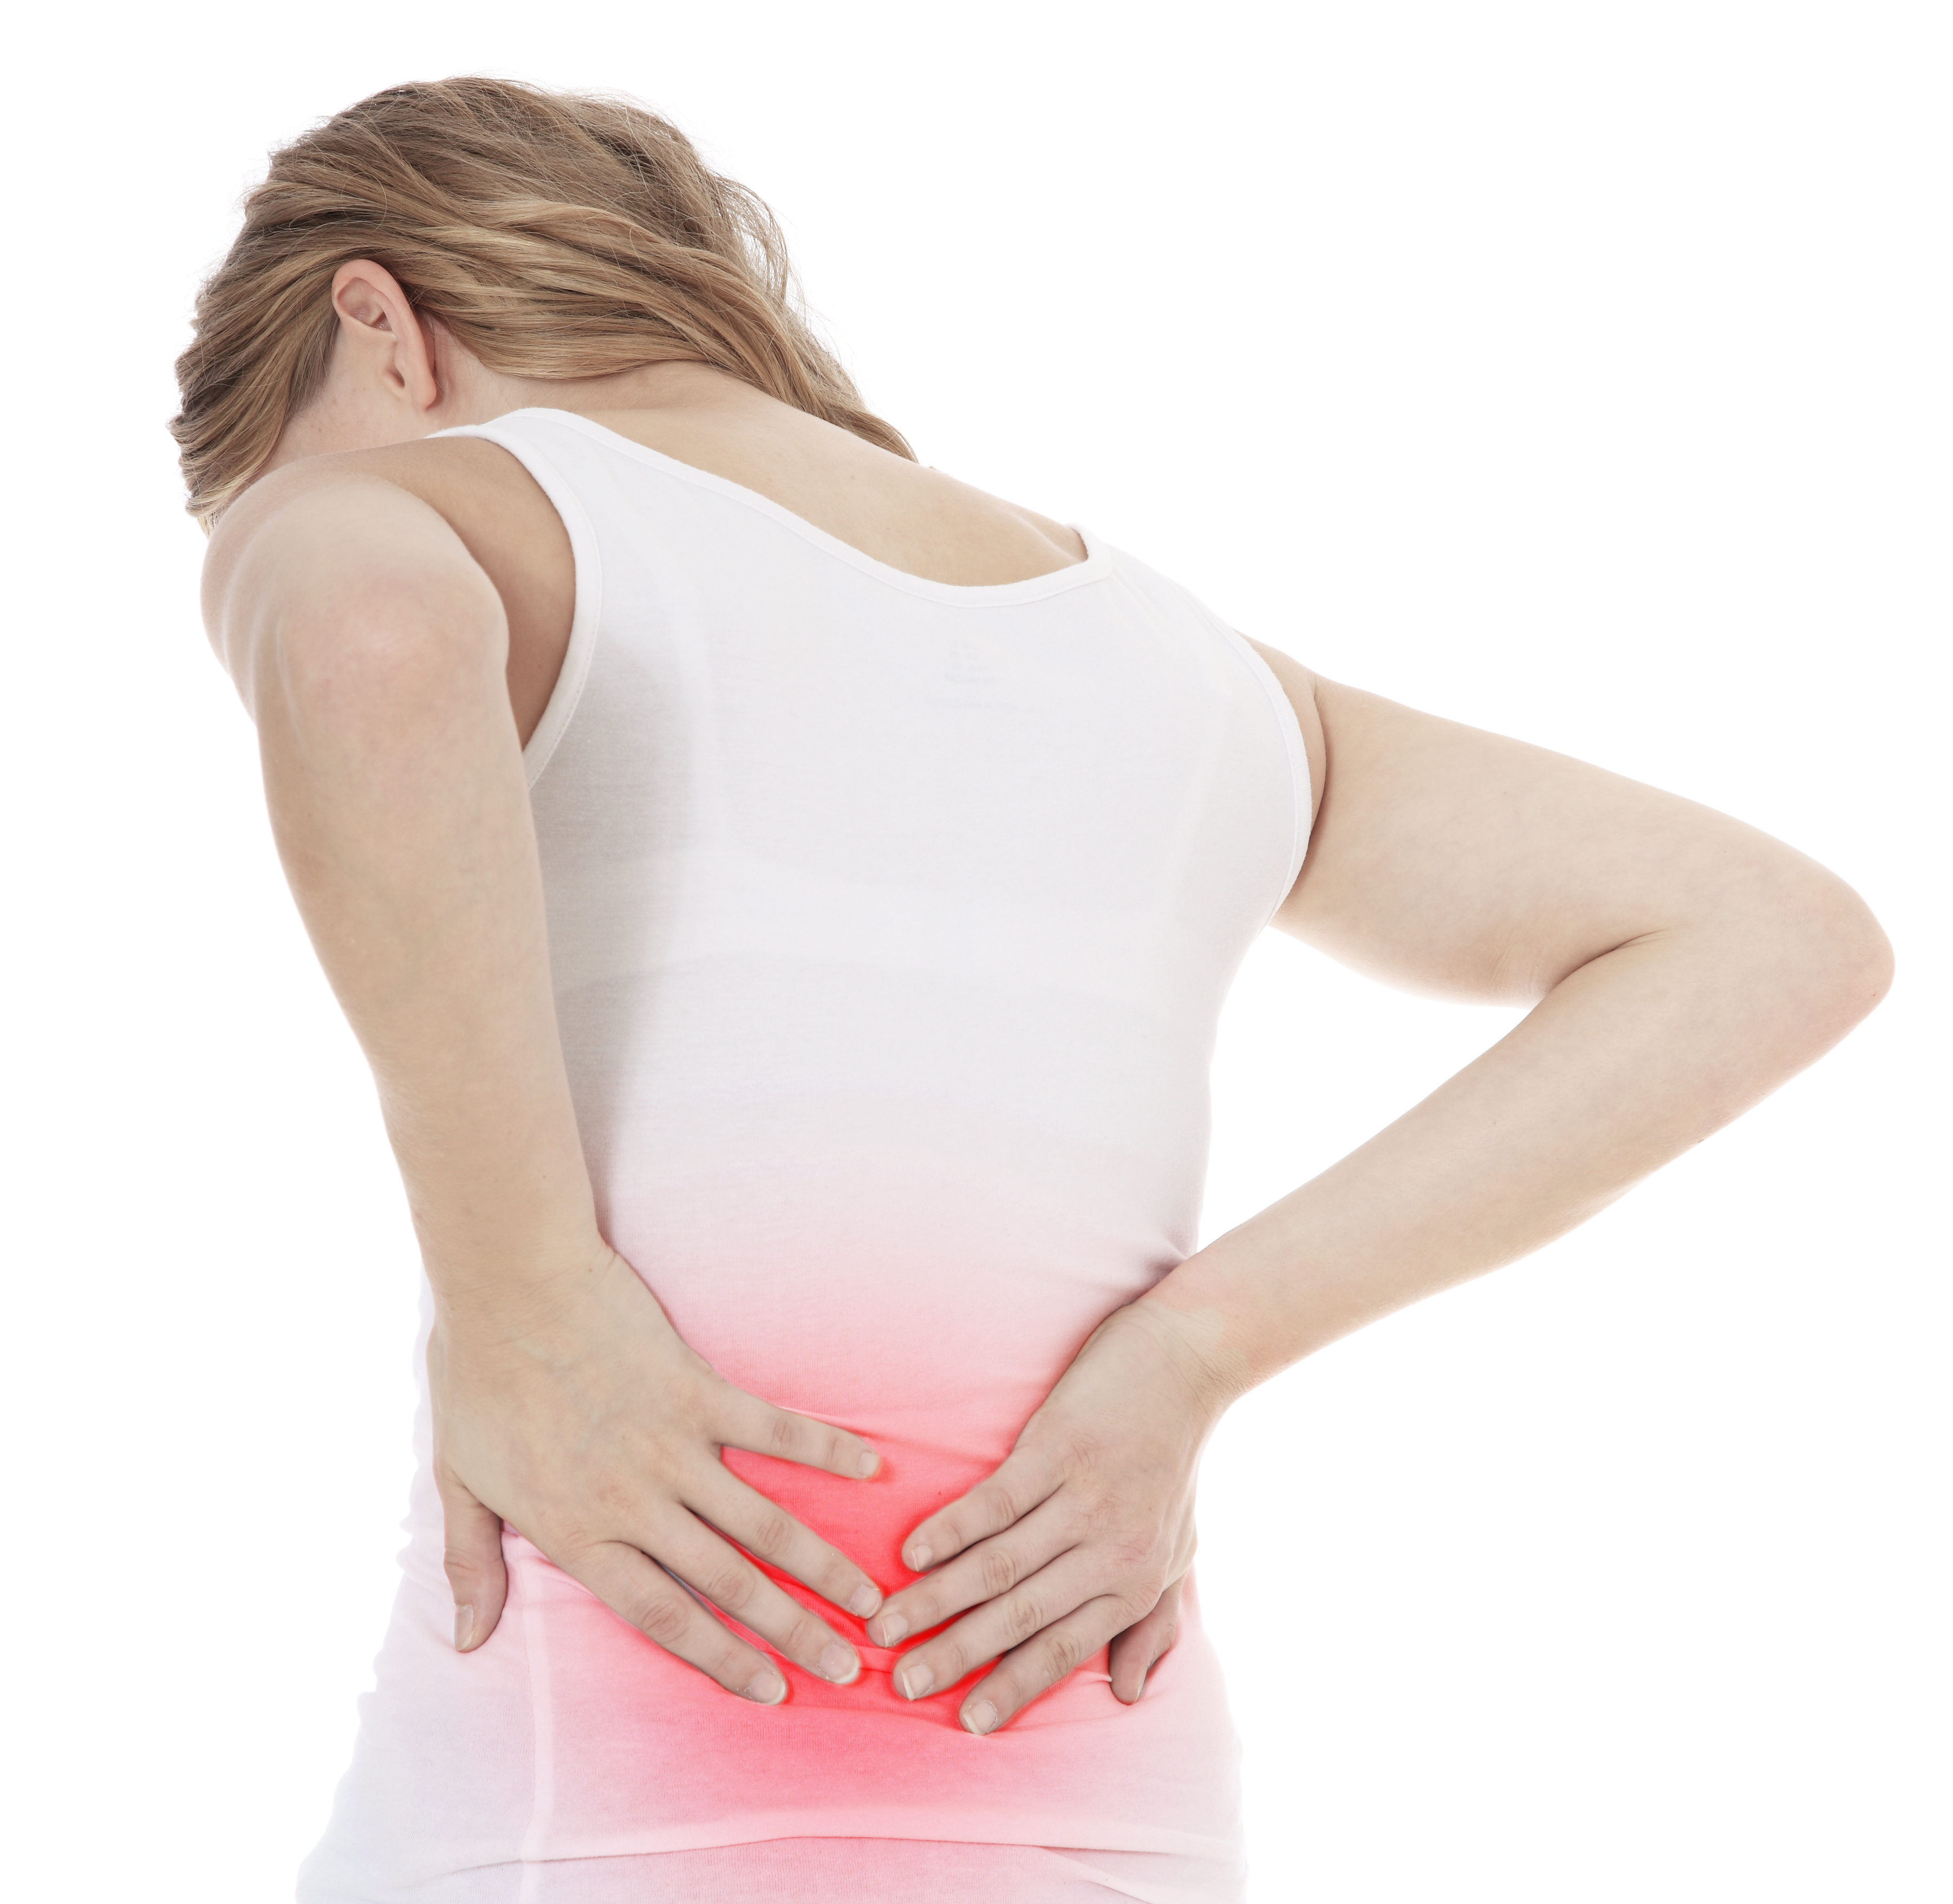 Attractive female person suffers from backache. All on white background.